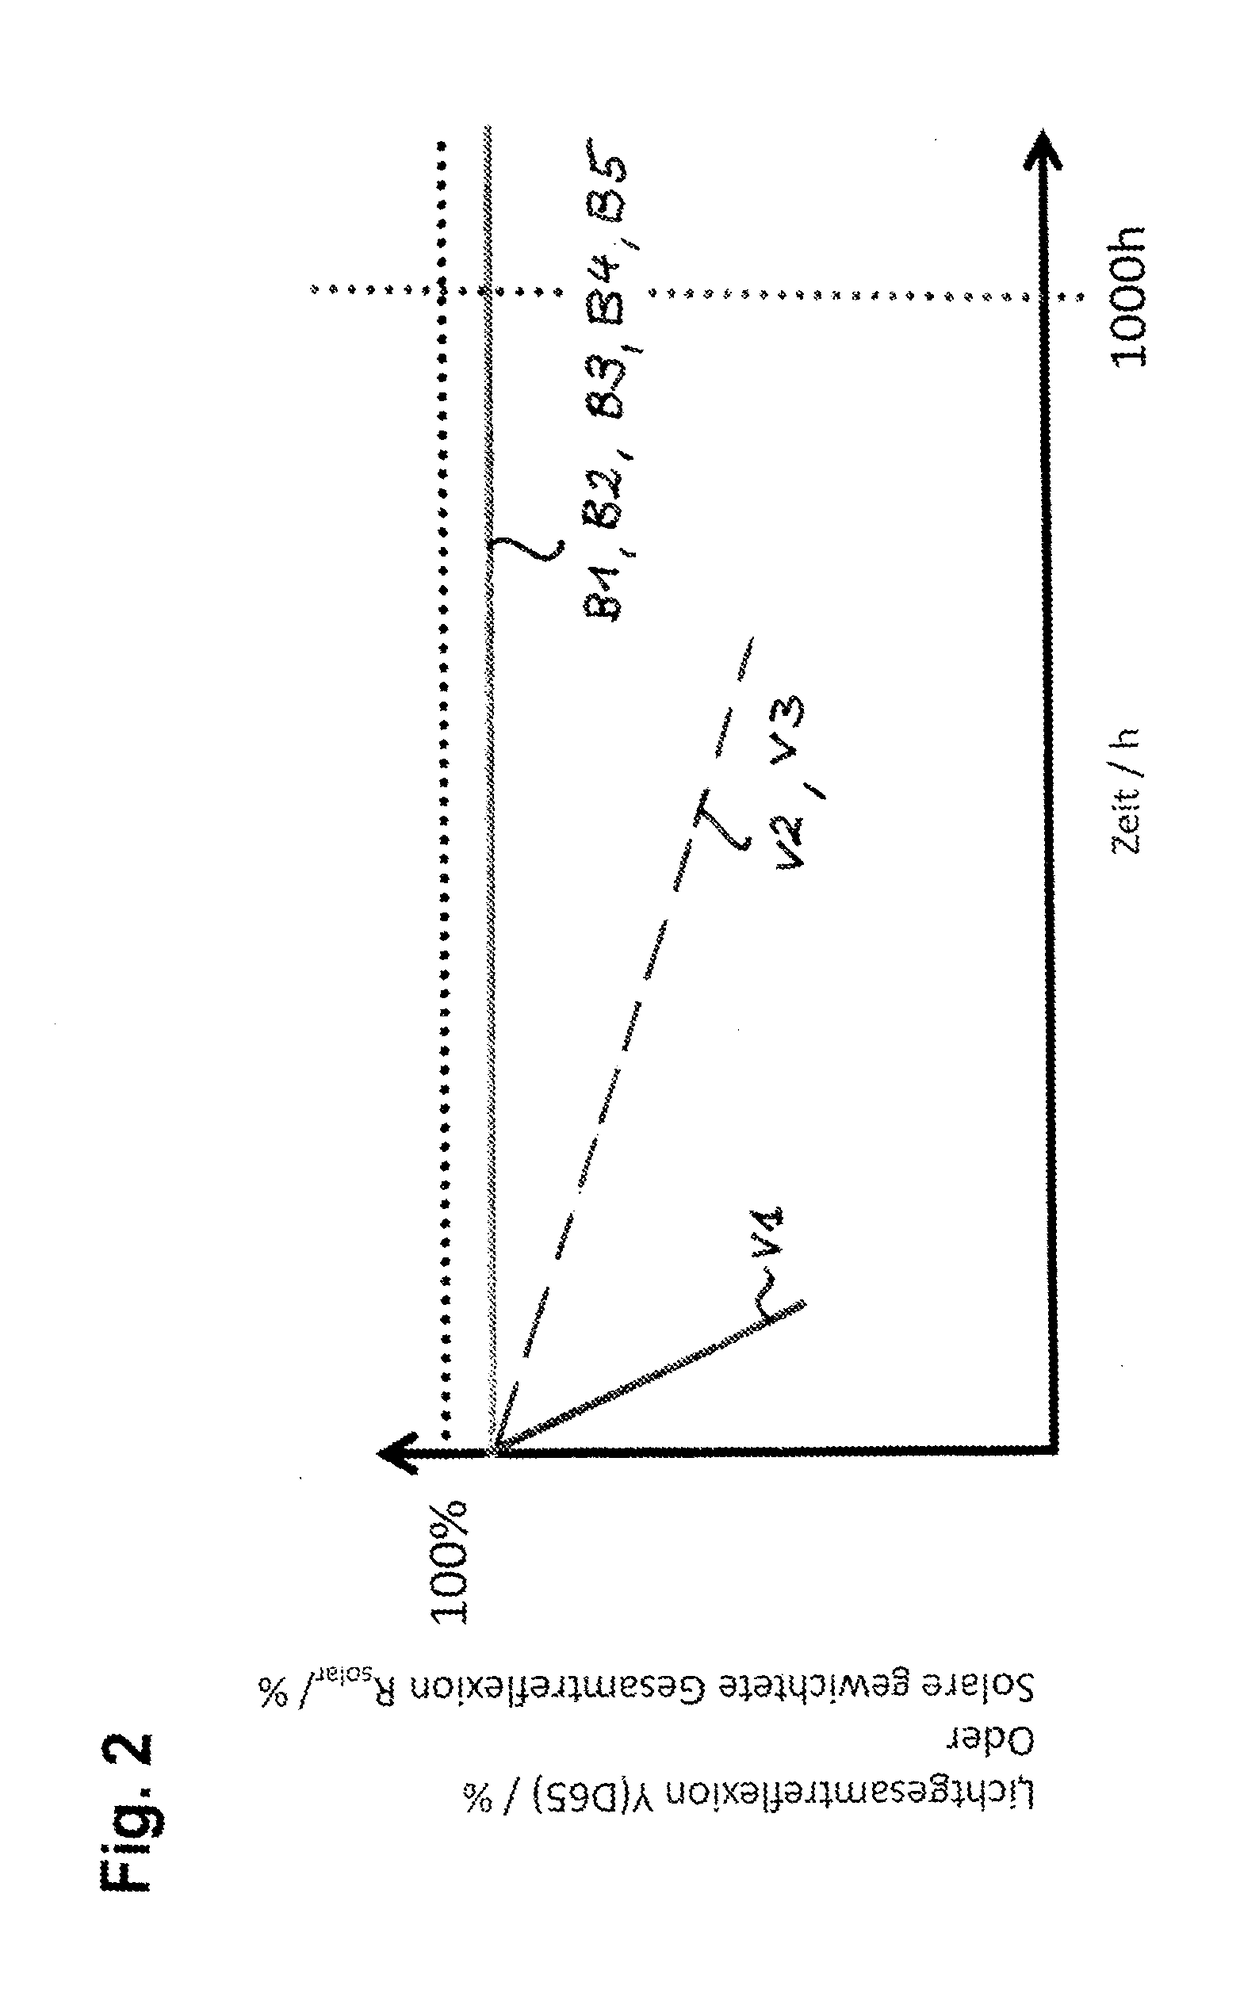 Reflective composite material comprising an aluminum substrate and a silver reflective layer